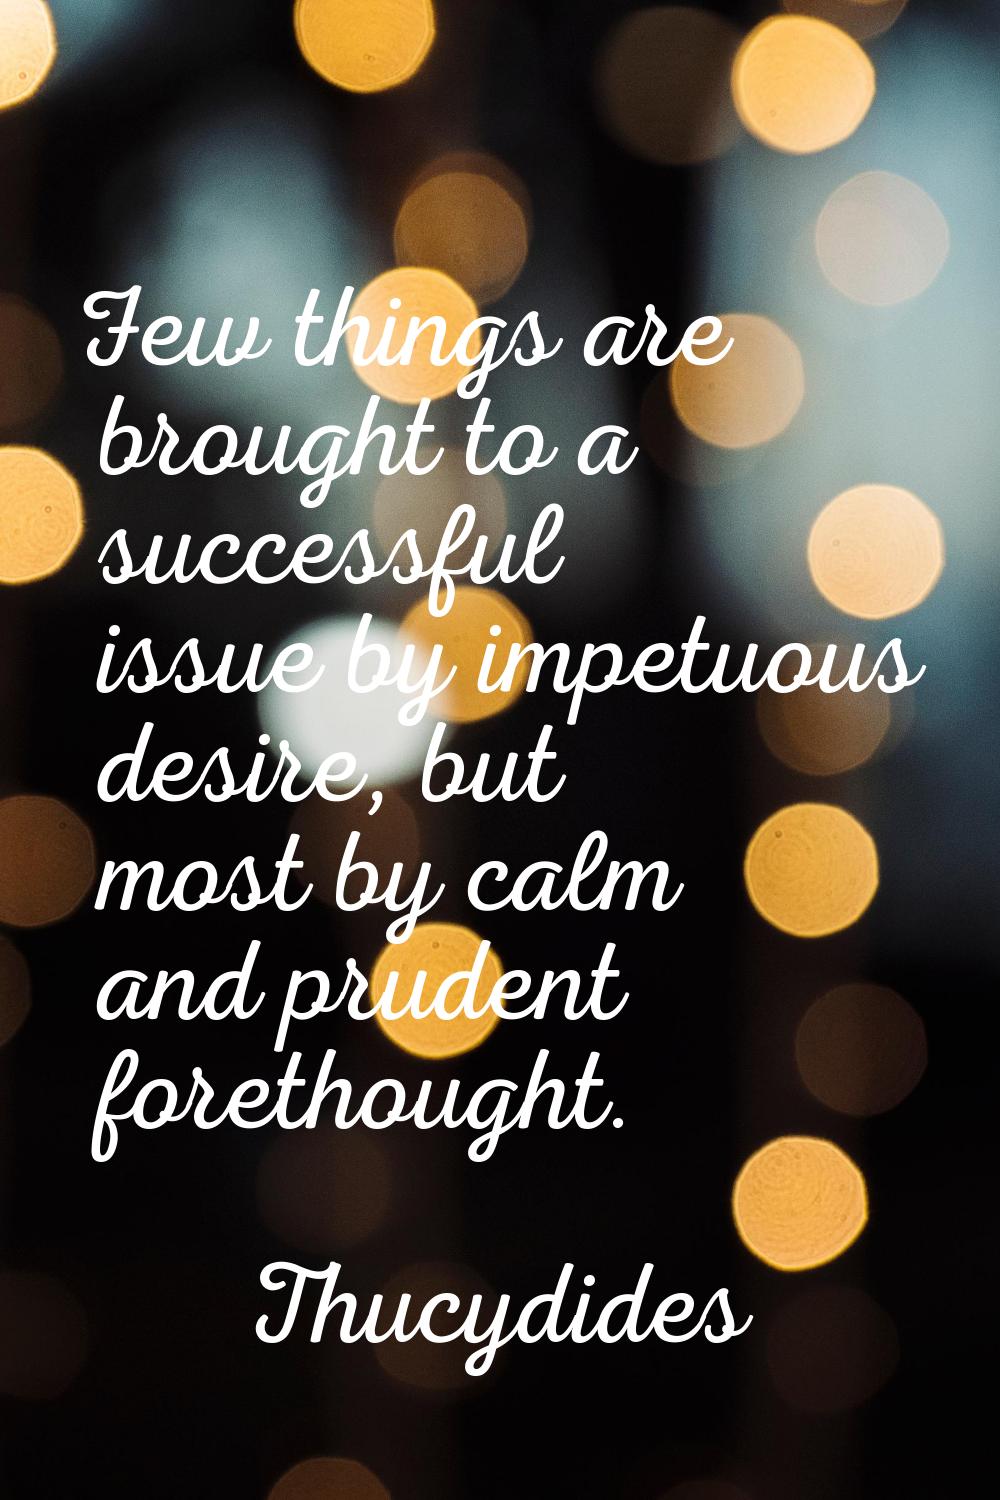 Few things are brought to a successful issue by impetuous desire, but most by calm and prudent fore